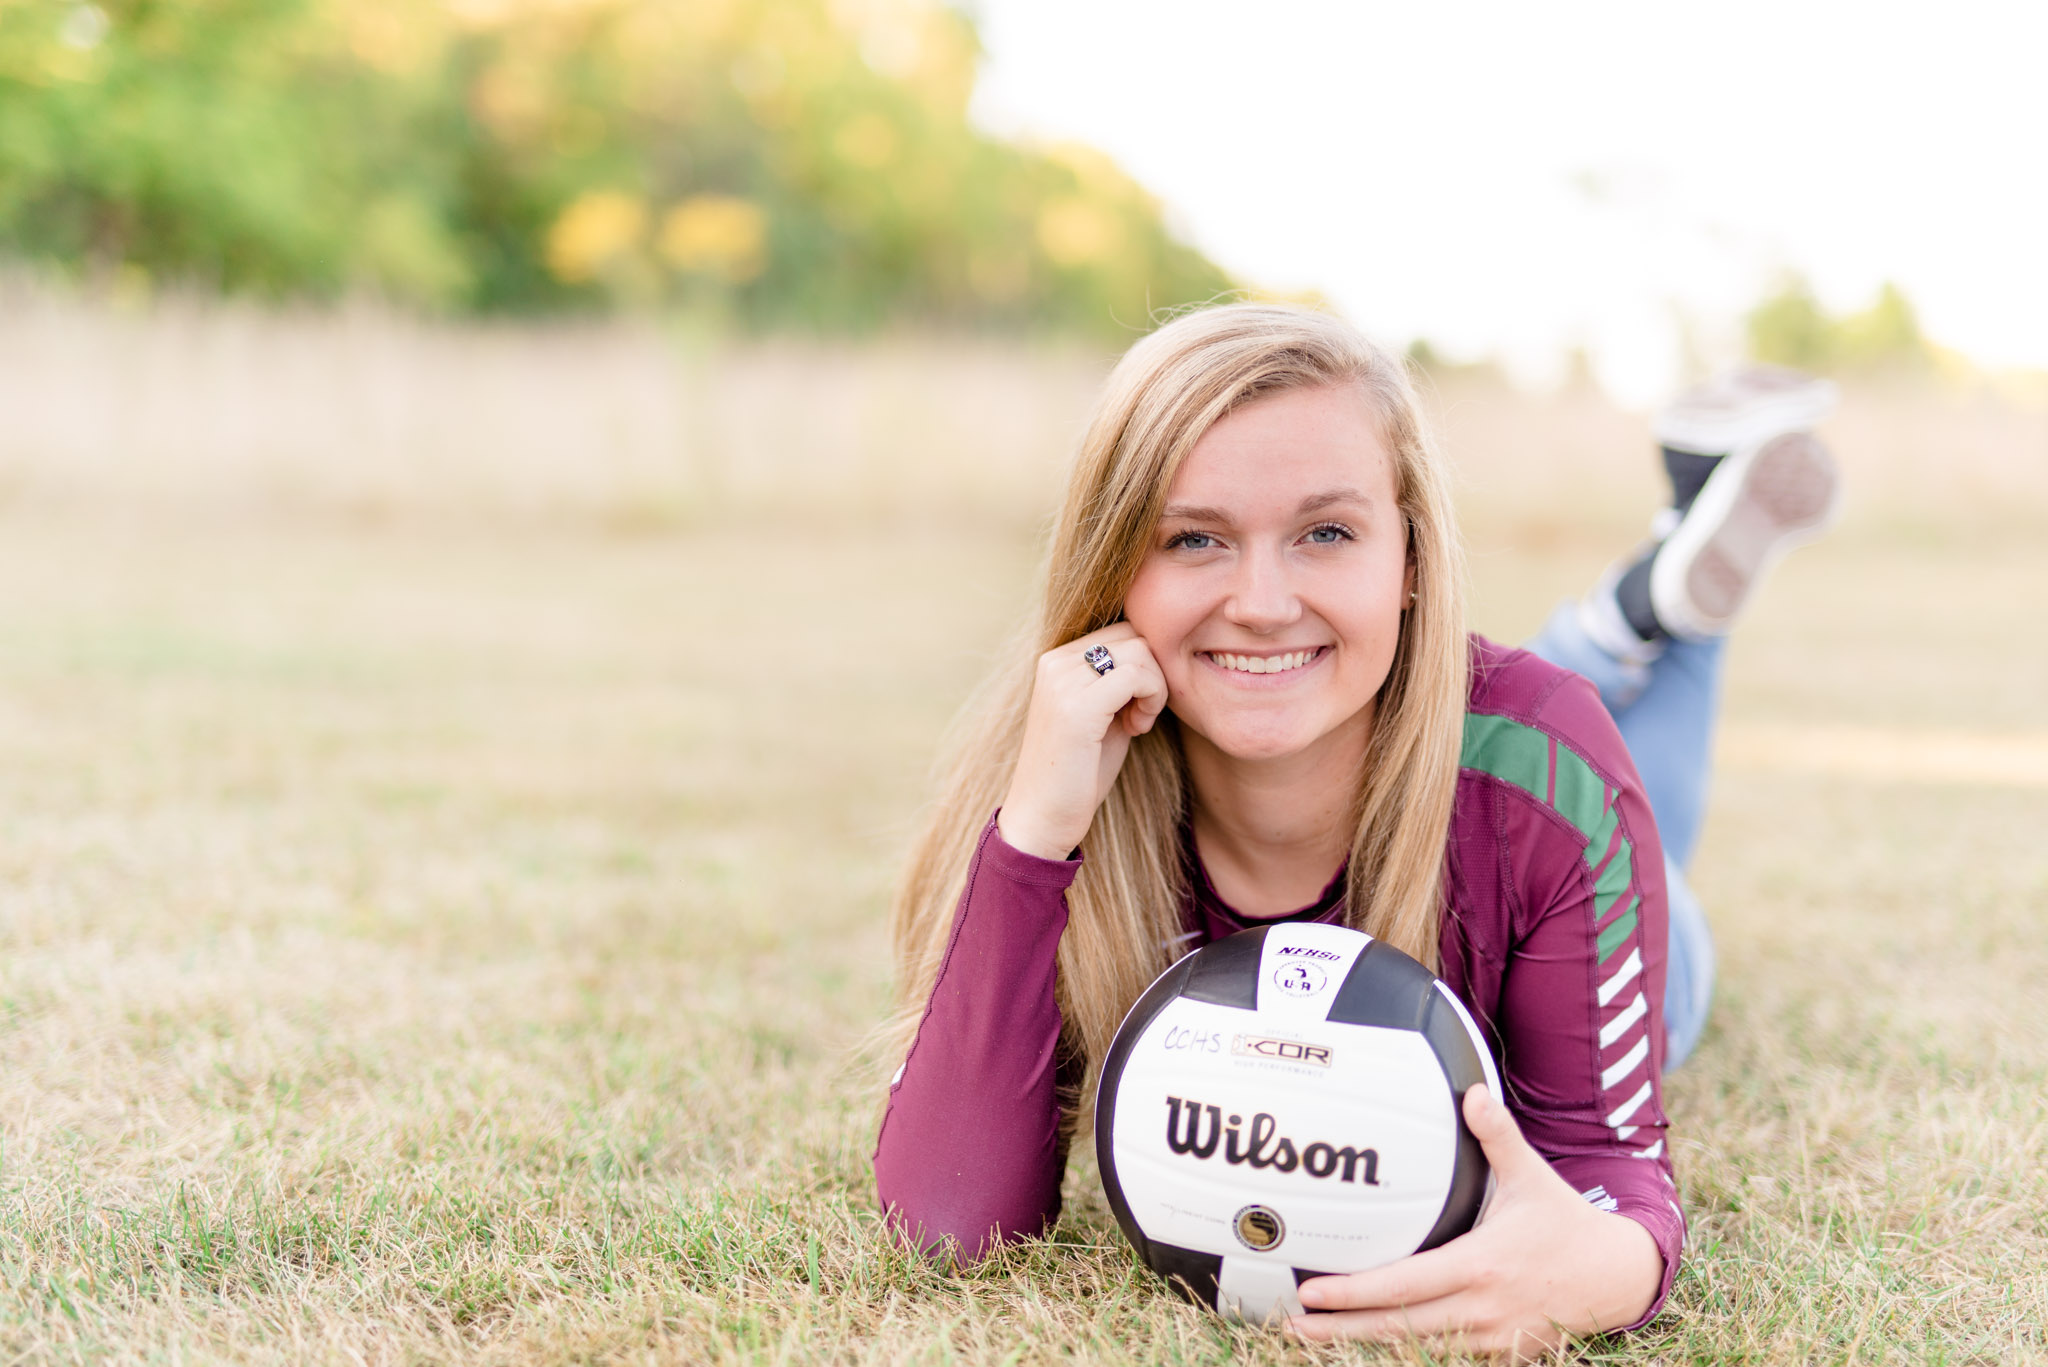 Senior girl holds volleyball in field and smiles.